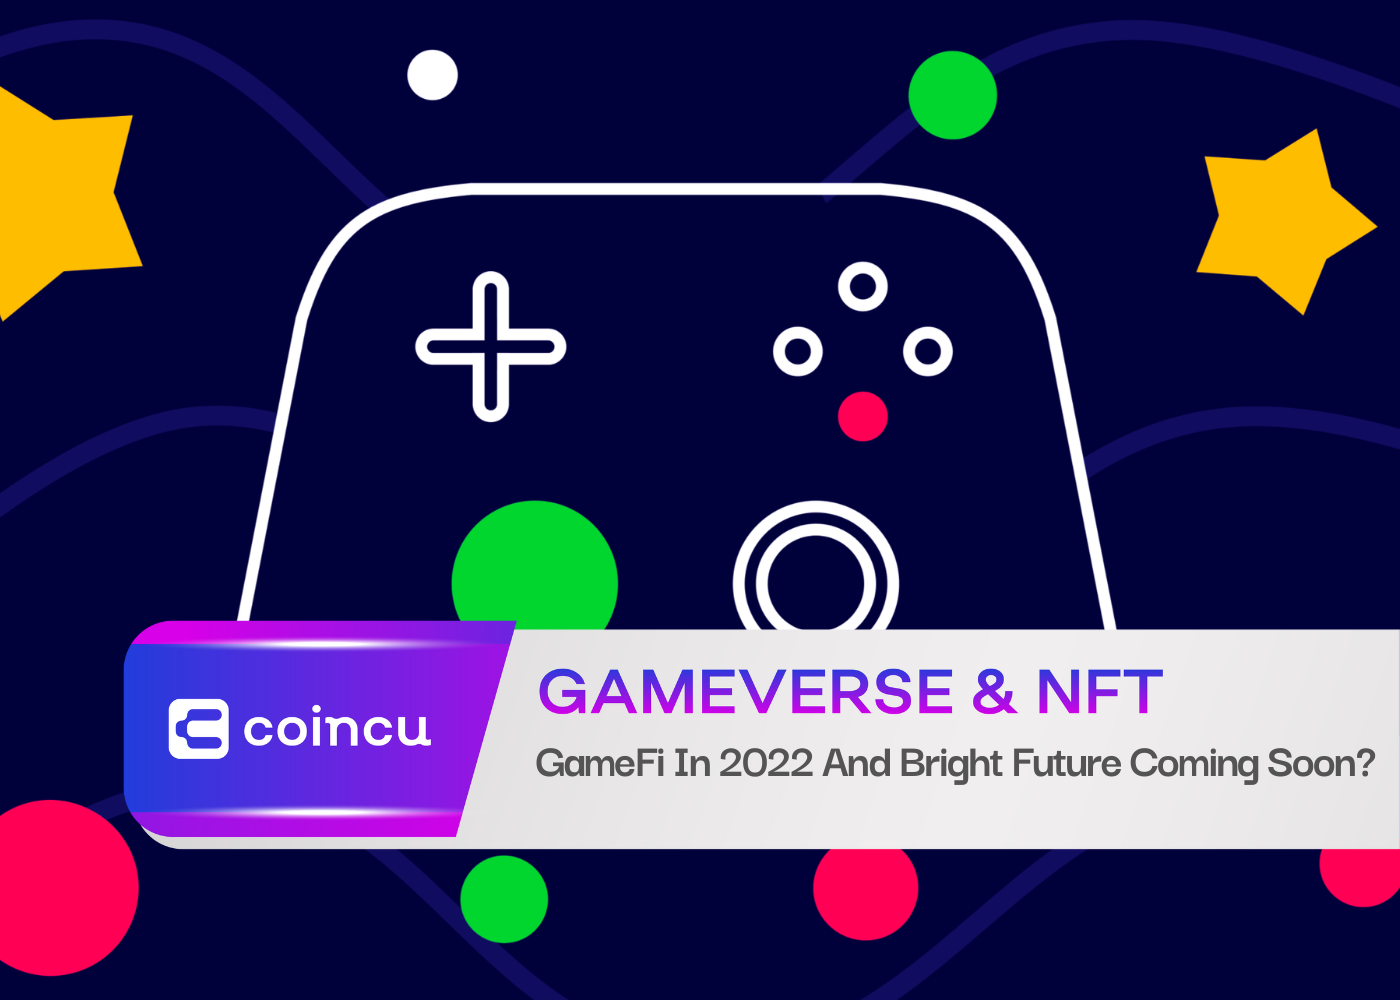 GameFi In 2022 And Bright Future Coming Soon?